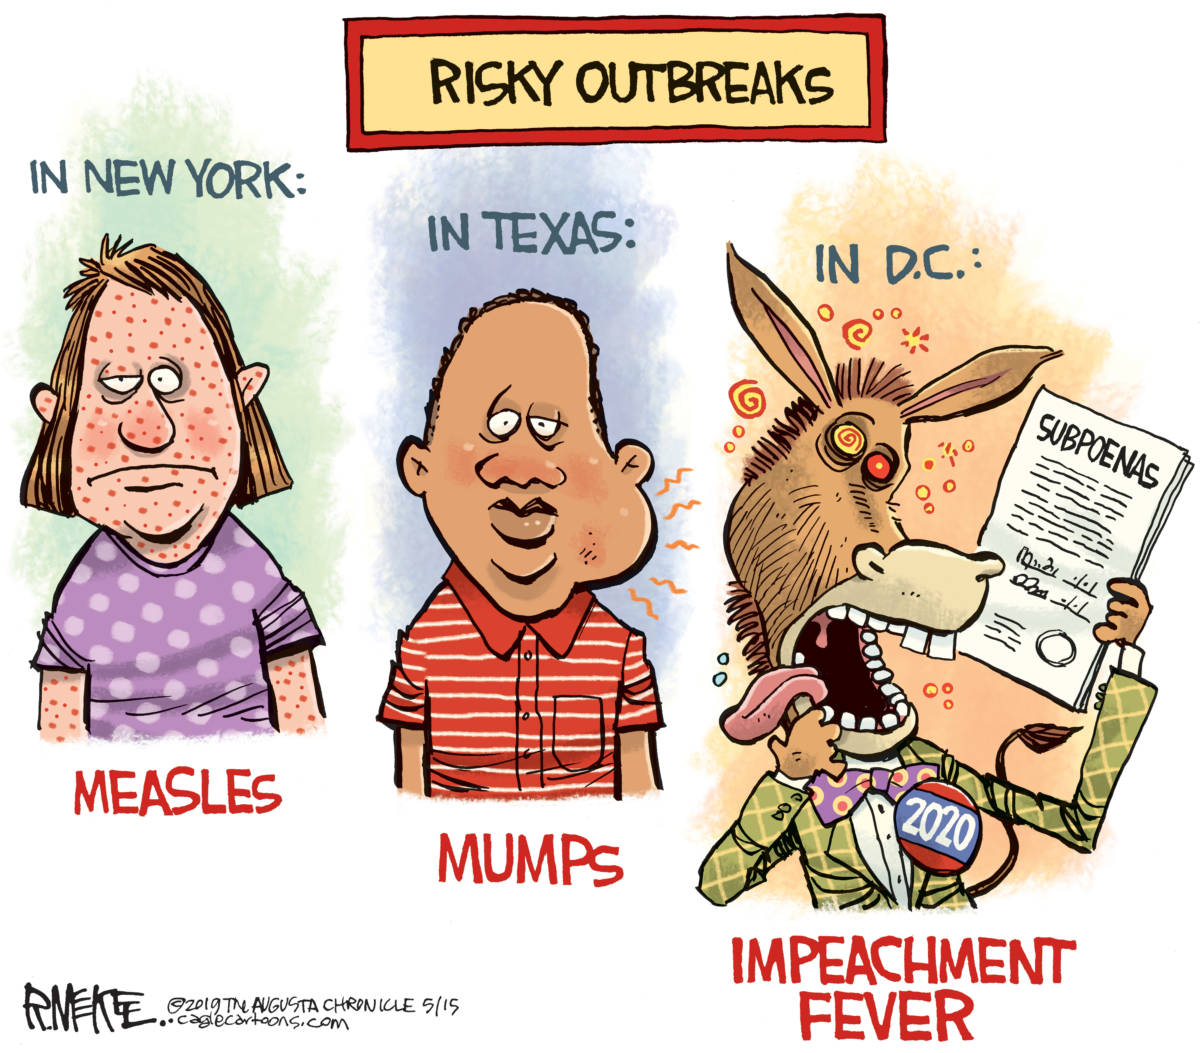 Impeachment Outbreak, Rick McKee, southern Utah, Utah, St. George, The Independent, Measles, mumps, outbreaks, anti vaxxers, vaccination, disease, illness, health, impeachment, Trump, Russia, collusion, obstruction,